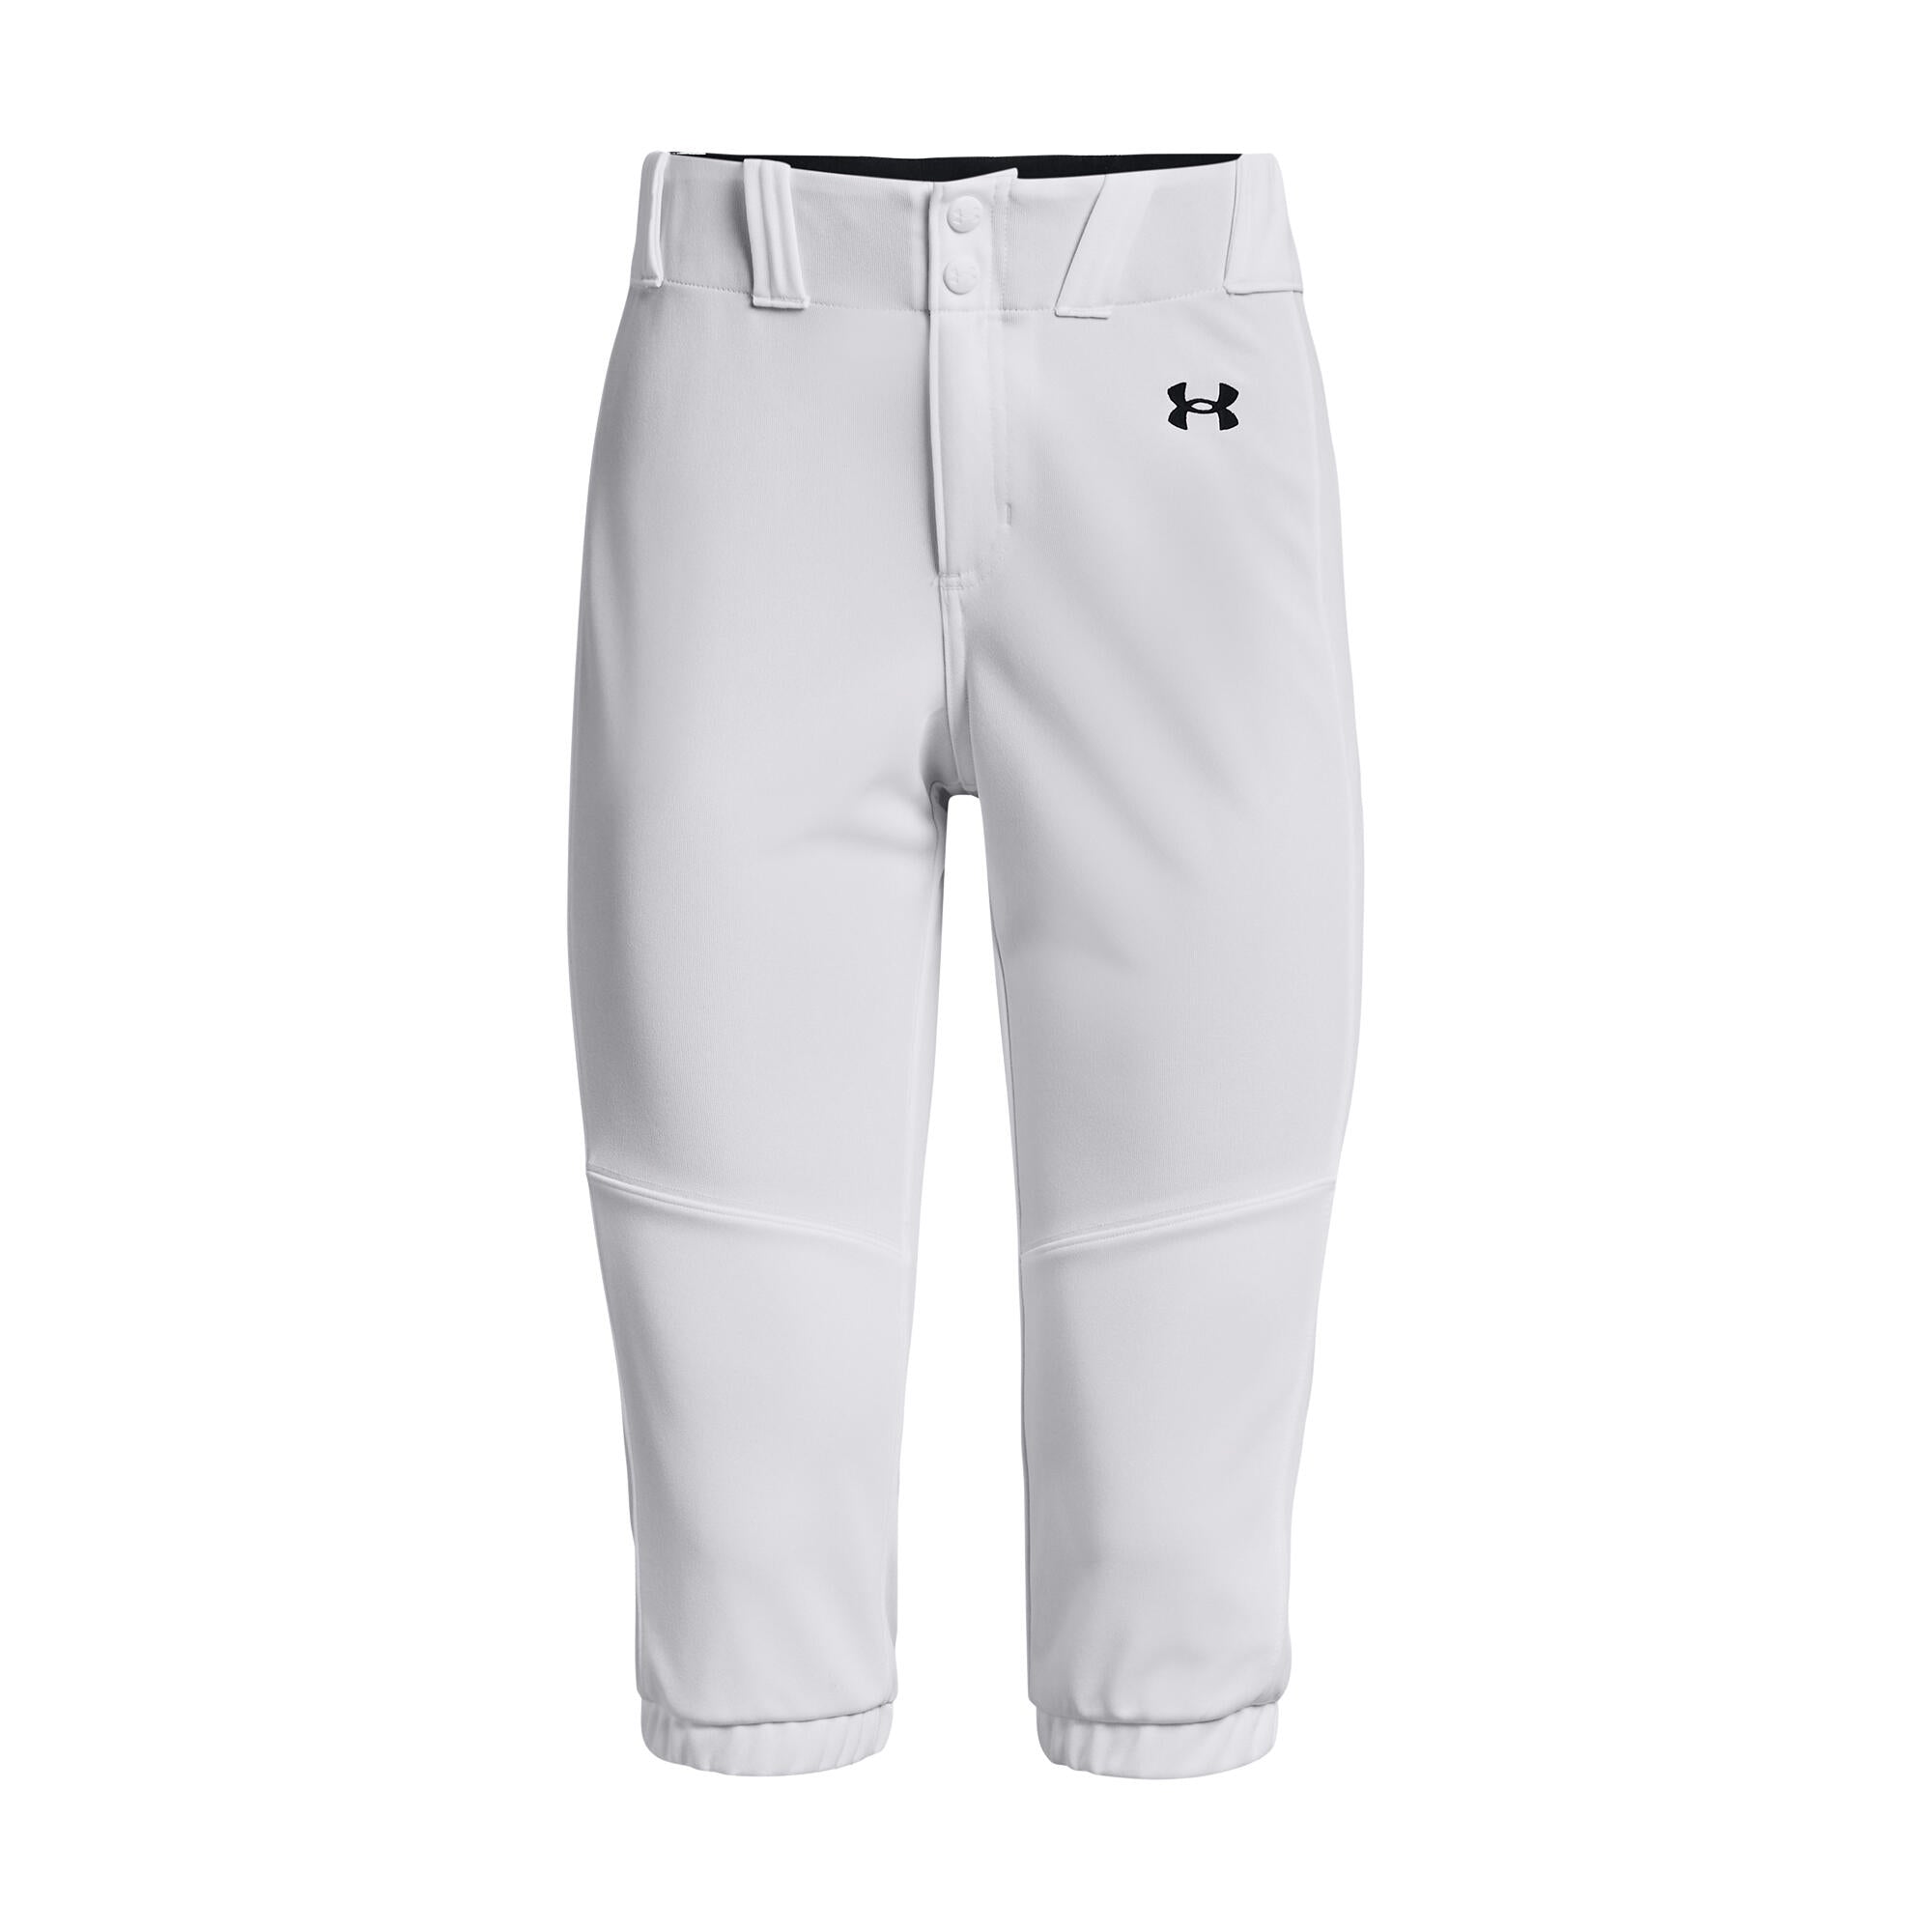 Under Armour Women's Large One-Hop Piped Softball Pants Blue